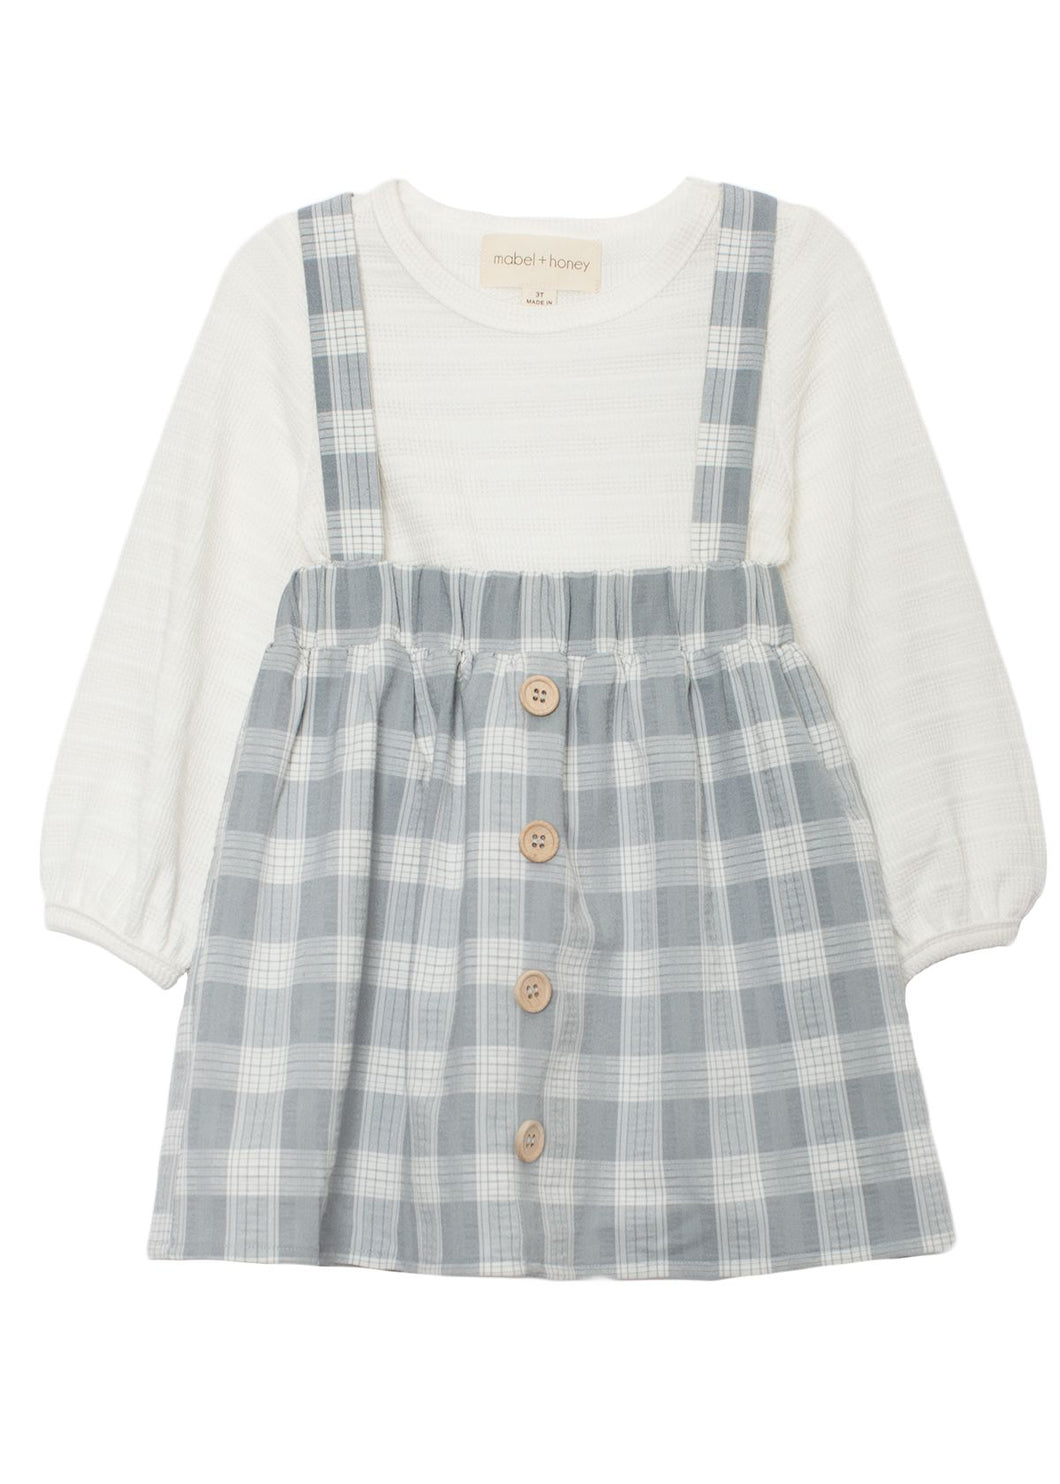 mabel + honey: 2 Piece Dress - Sweet Lullaby Plaid Woven (Grey)